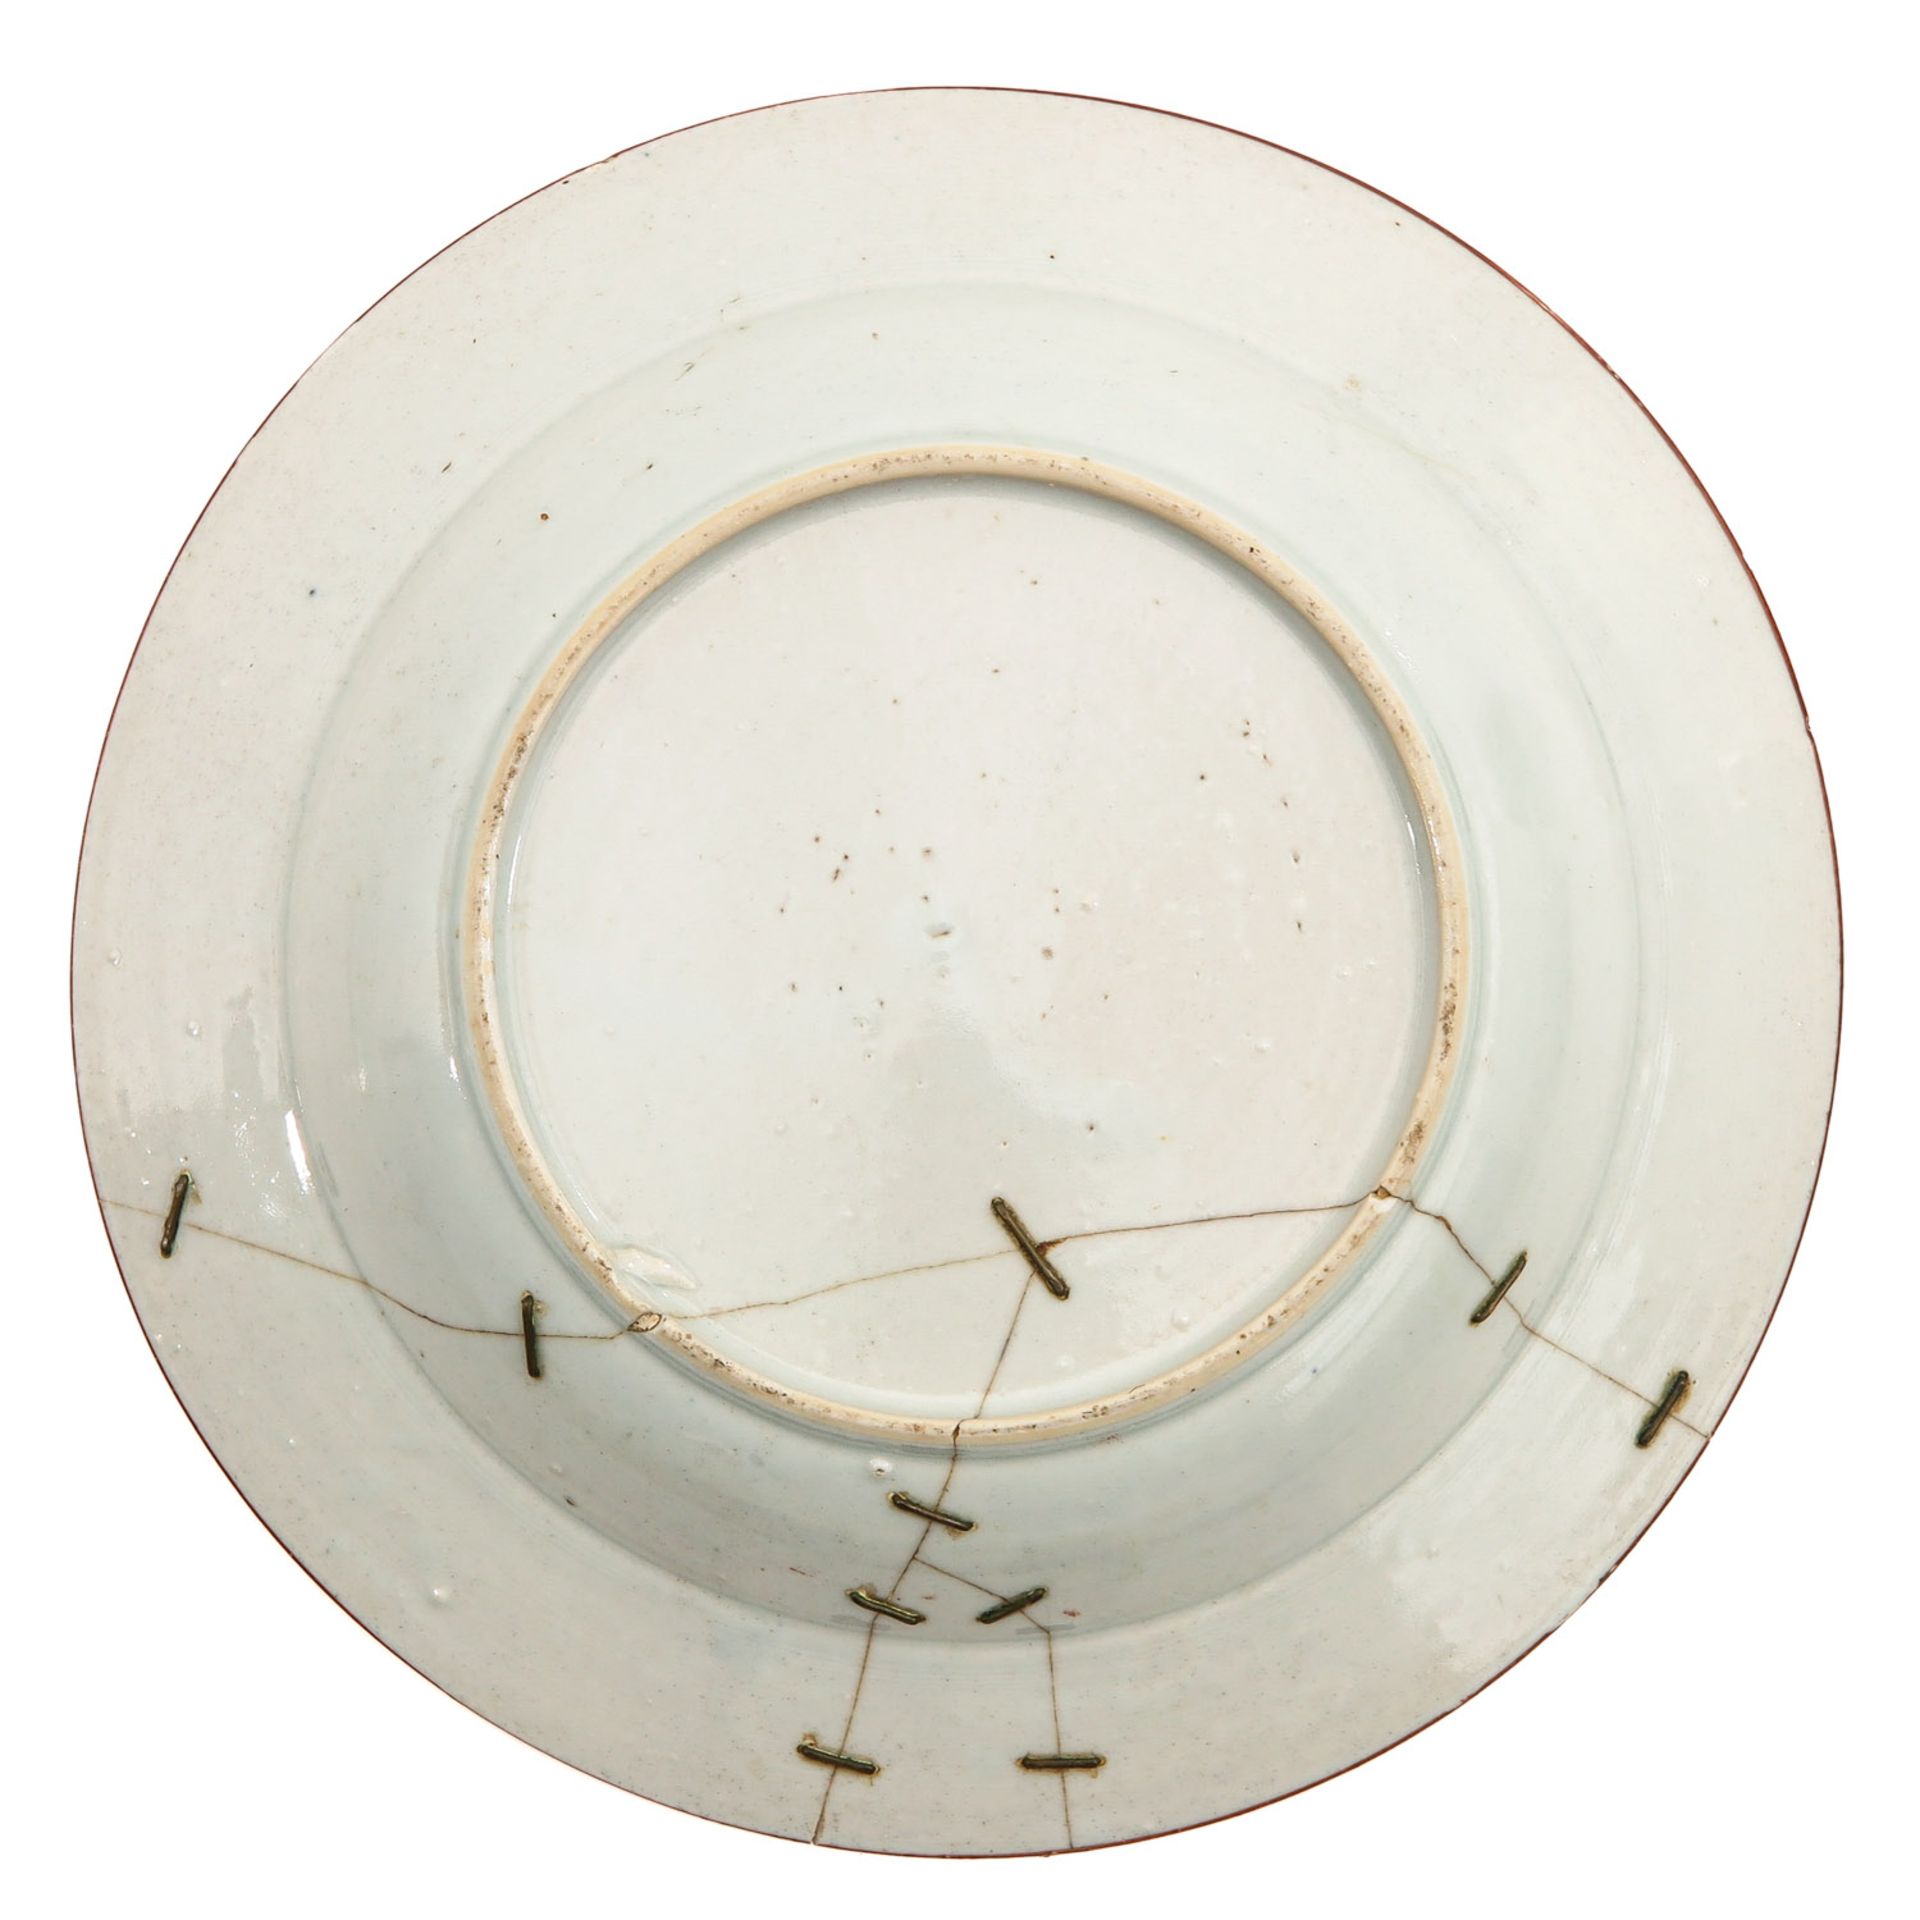 A Series of 3 Polychrome Decor Plates - Image 6 of 10